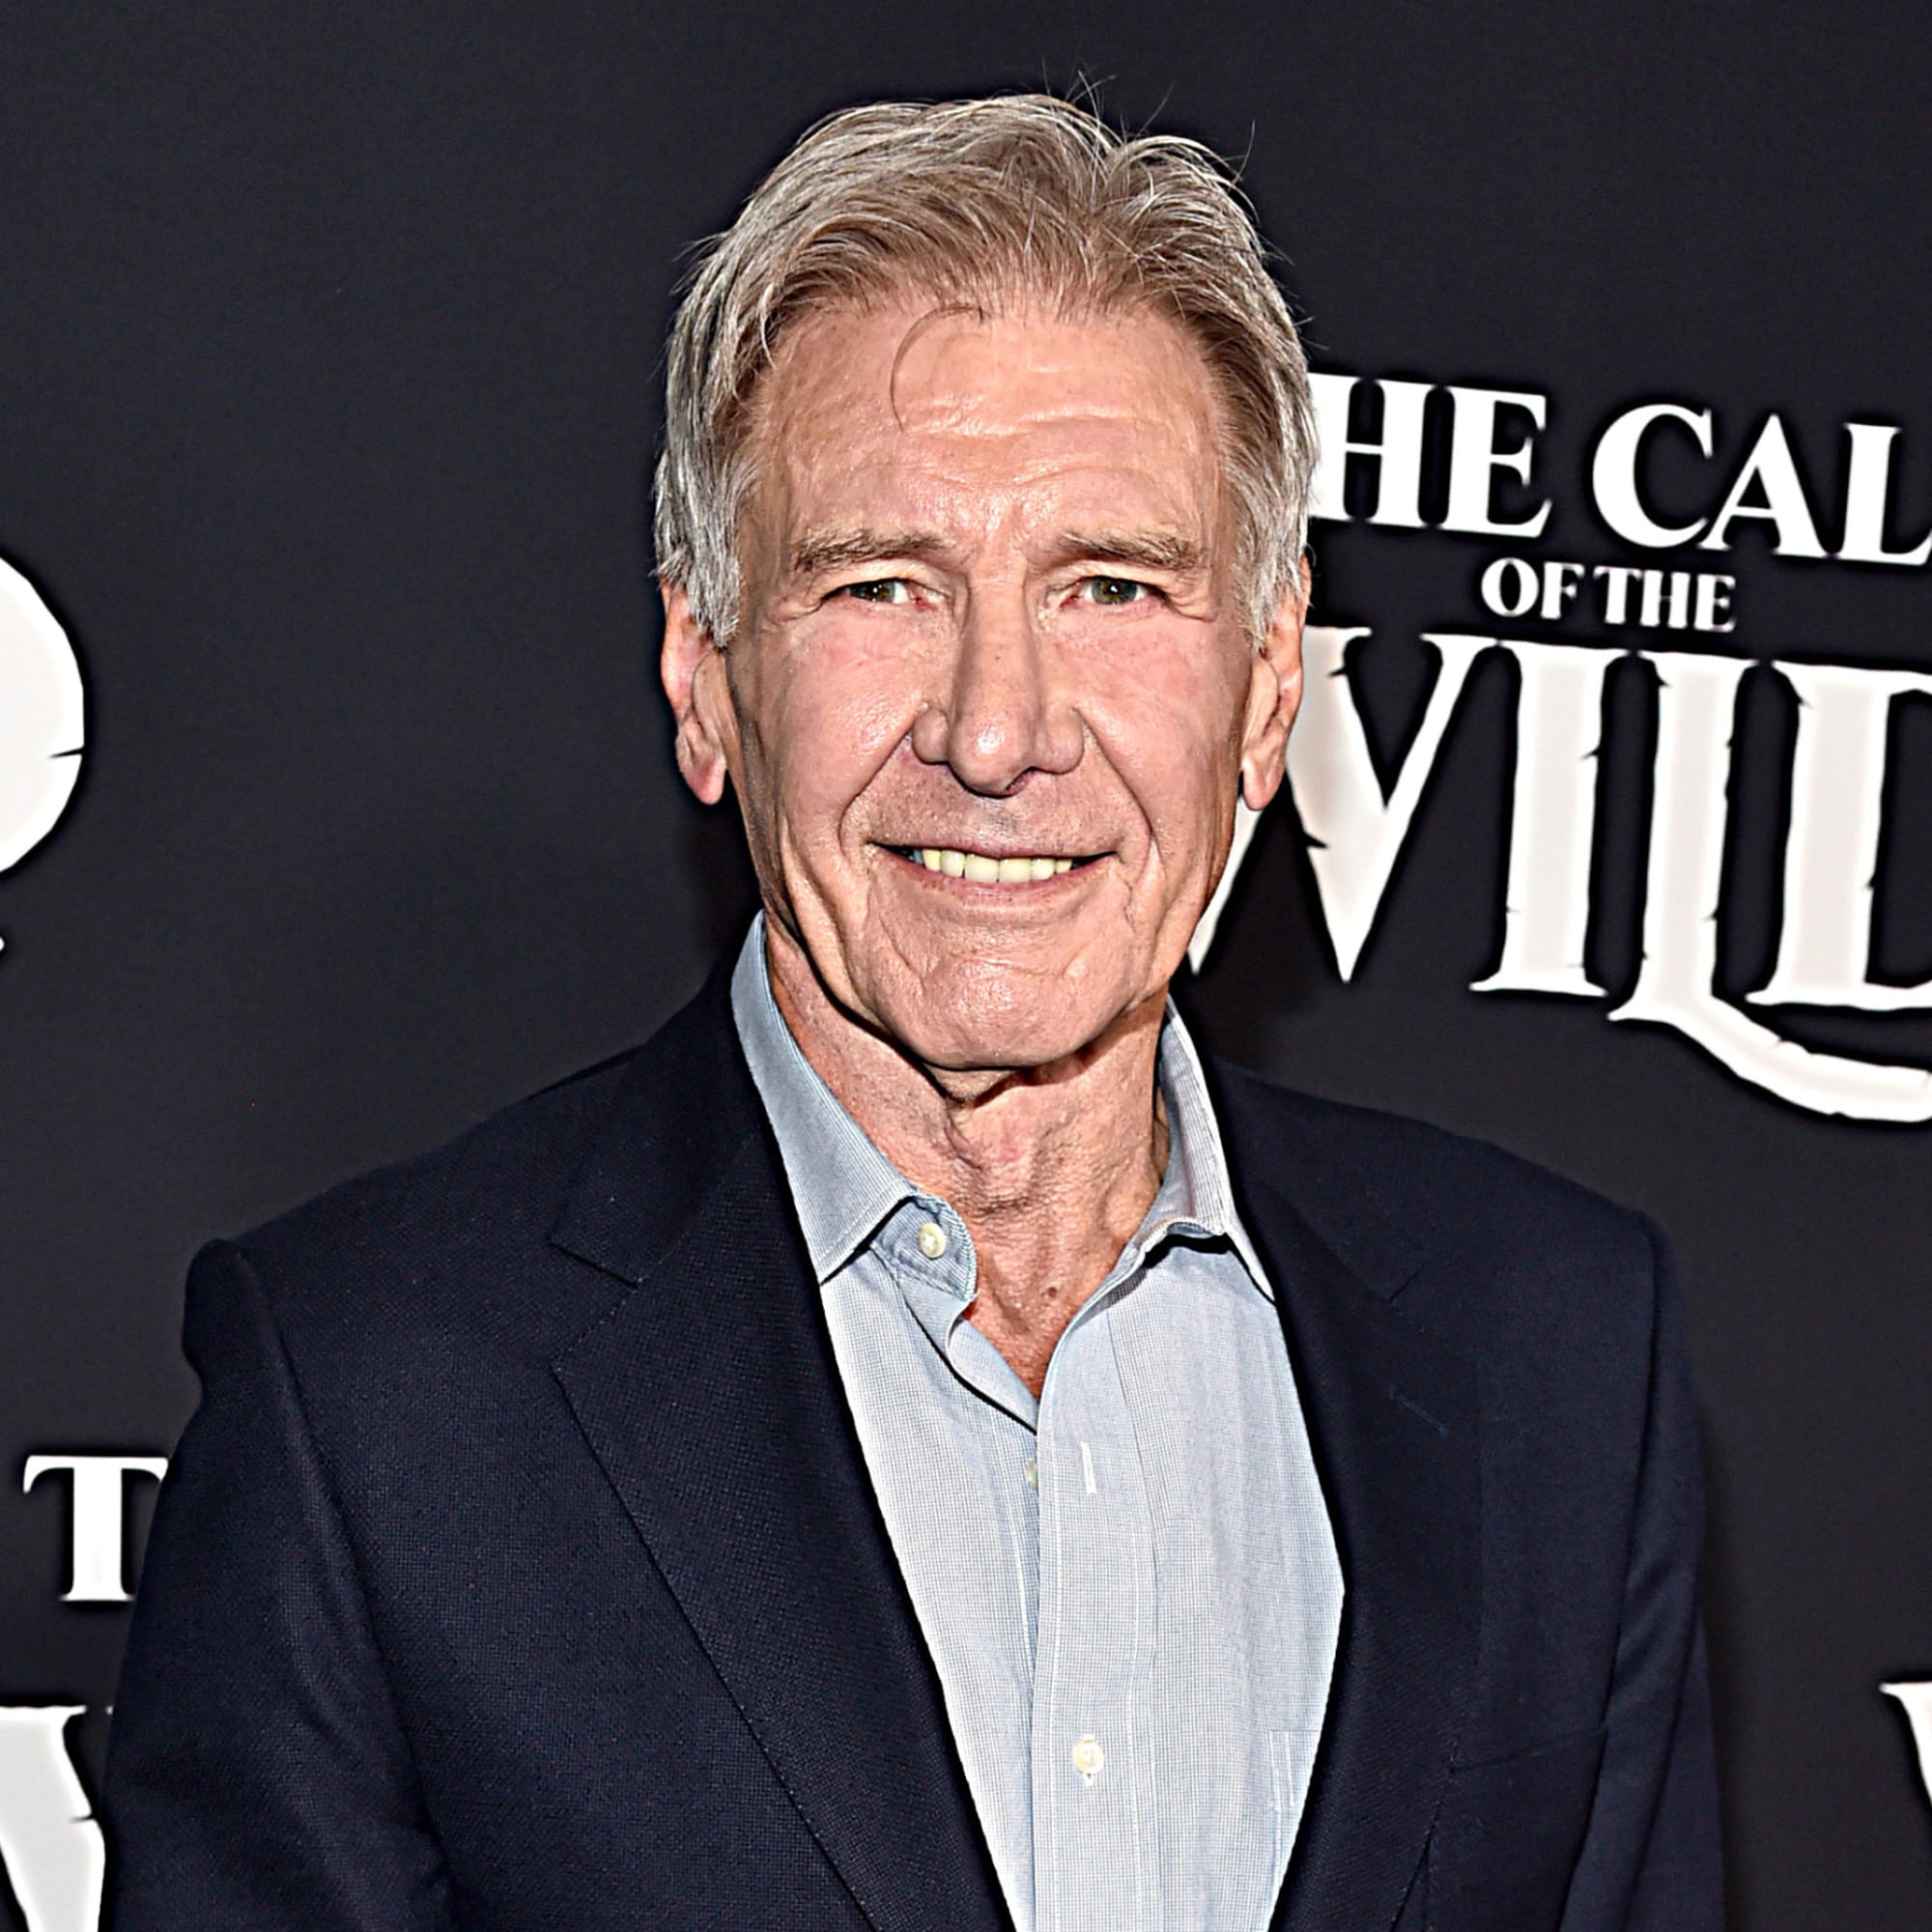 Here's our first look at Harrison Ford in Indiana Jones 5!